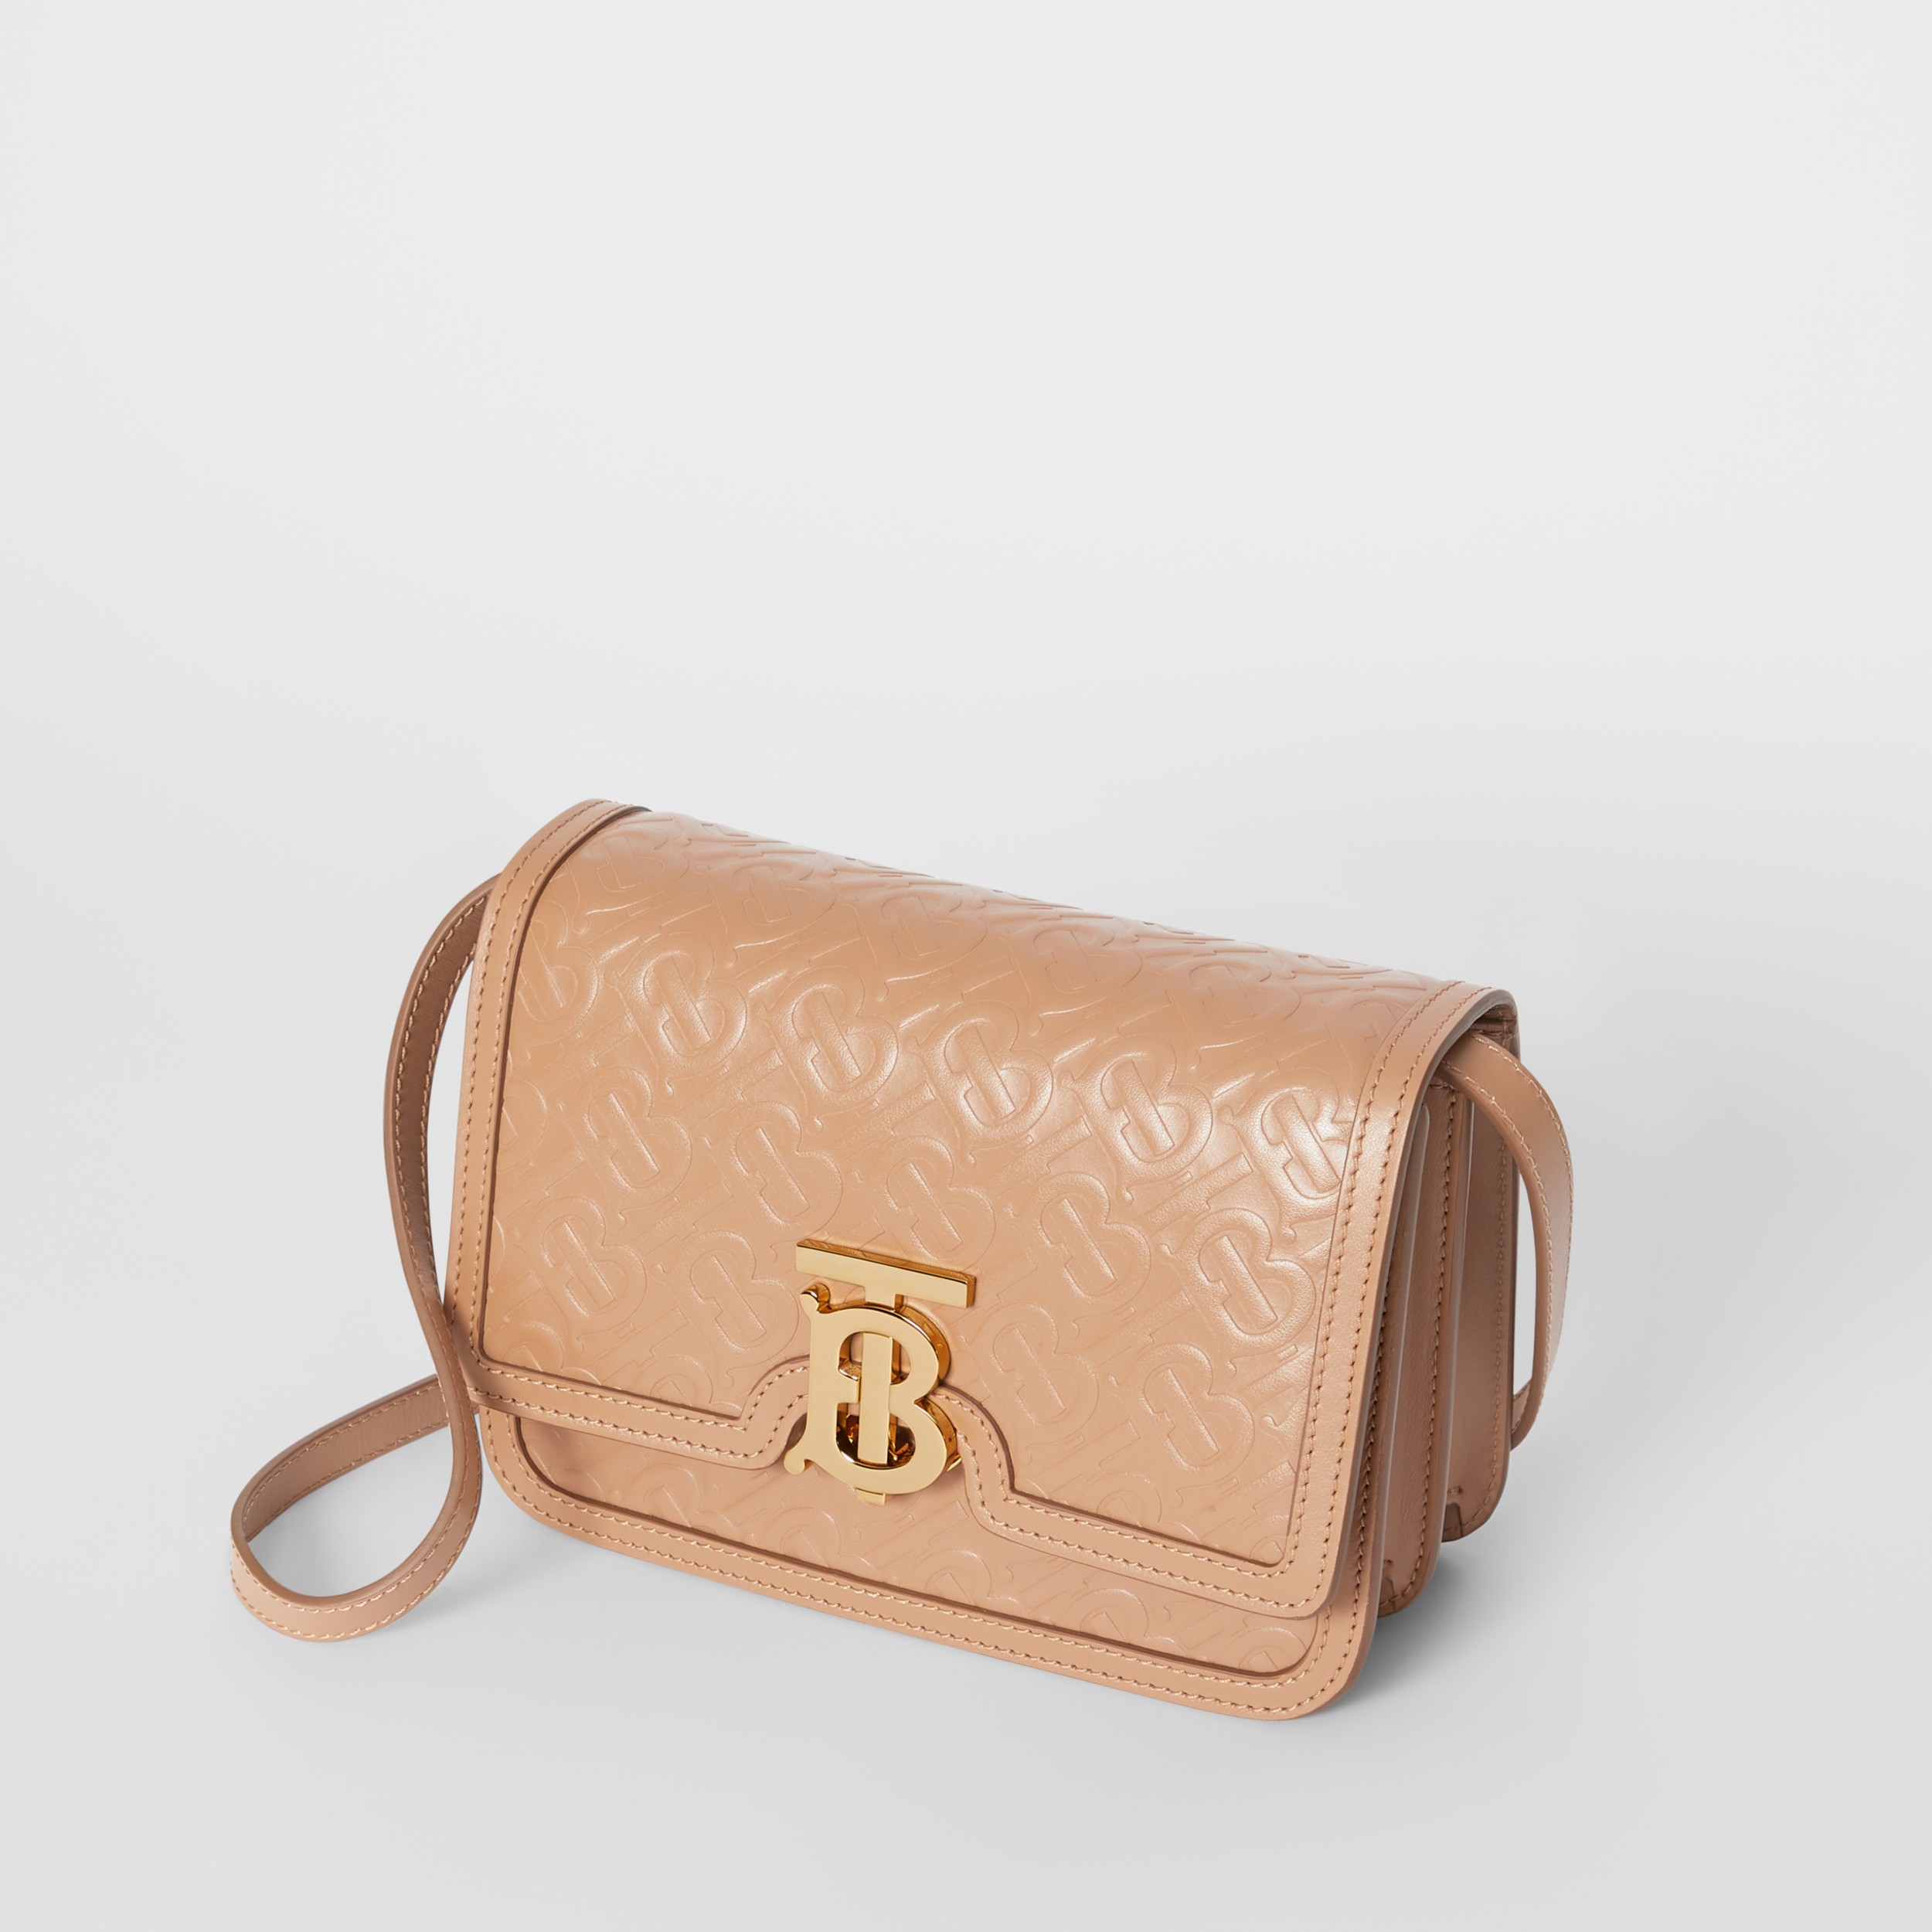 Small Monogram Leather TB Bag in Light Camel - Women | Burberry United States